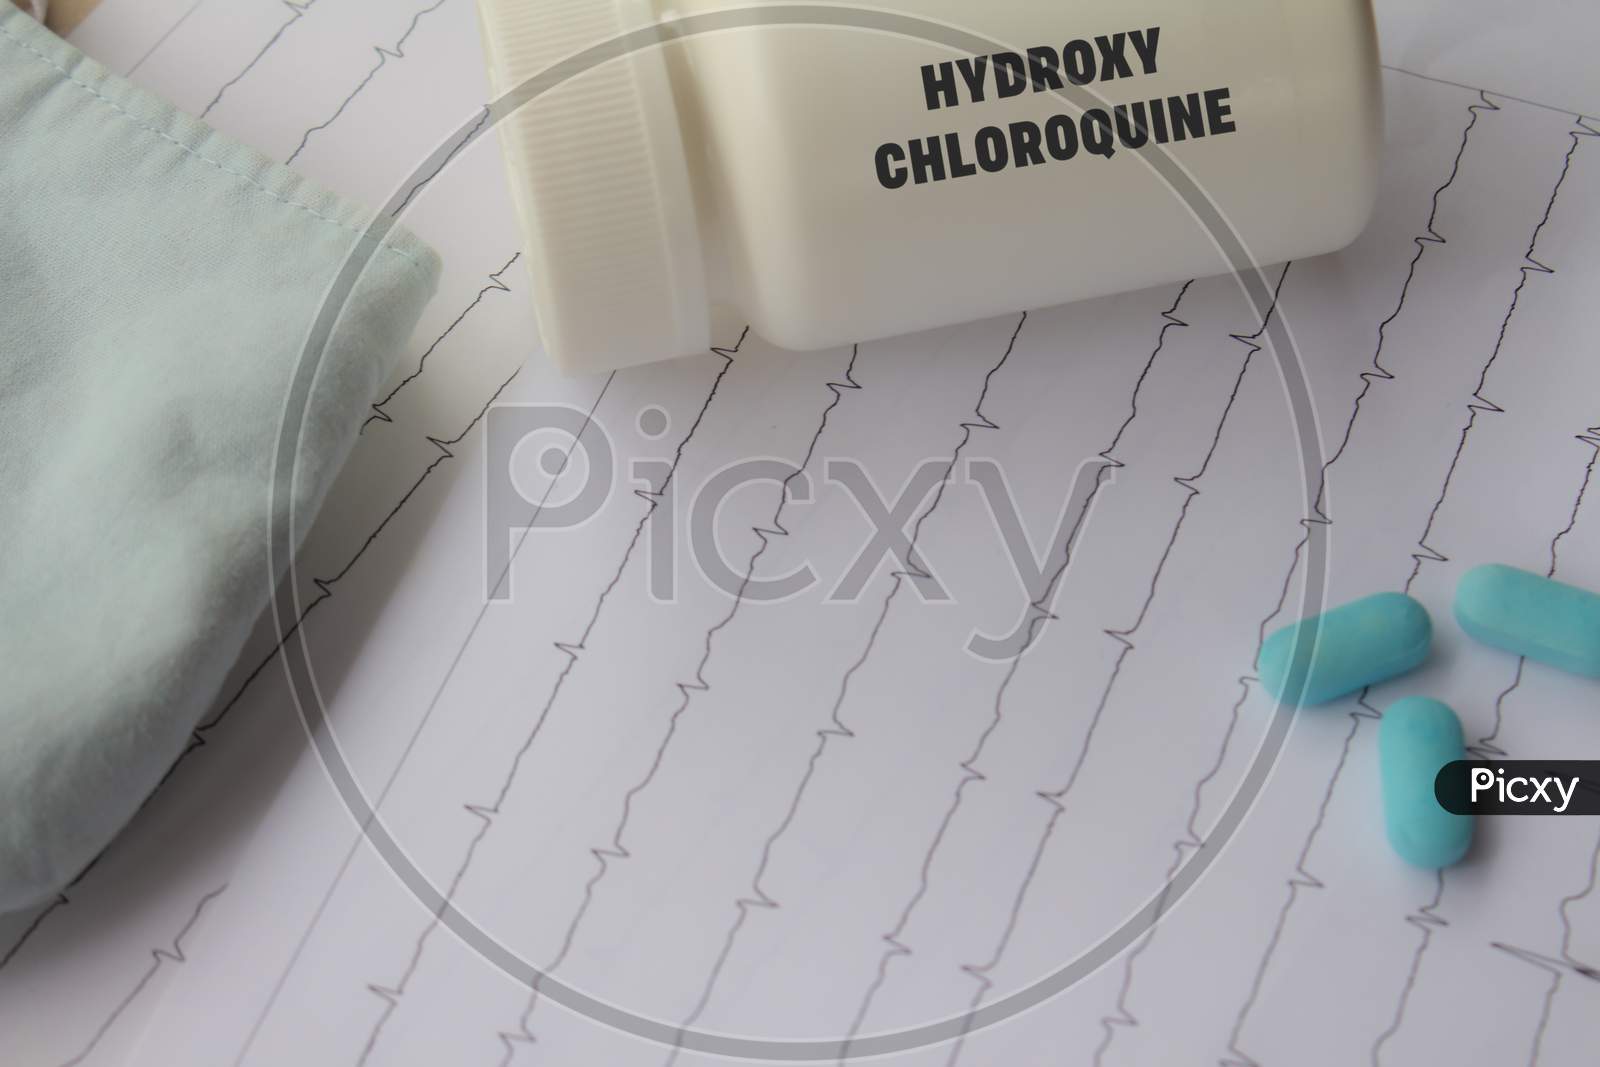 Doctor'S Desk. Medical Elements Related To Coronavirus. Medication Dispenser With The Word Hydroxychloroquine Written On It.